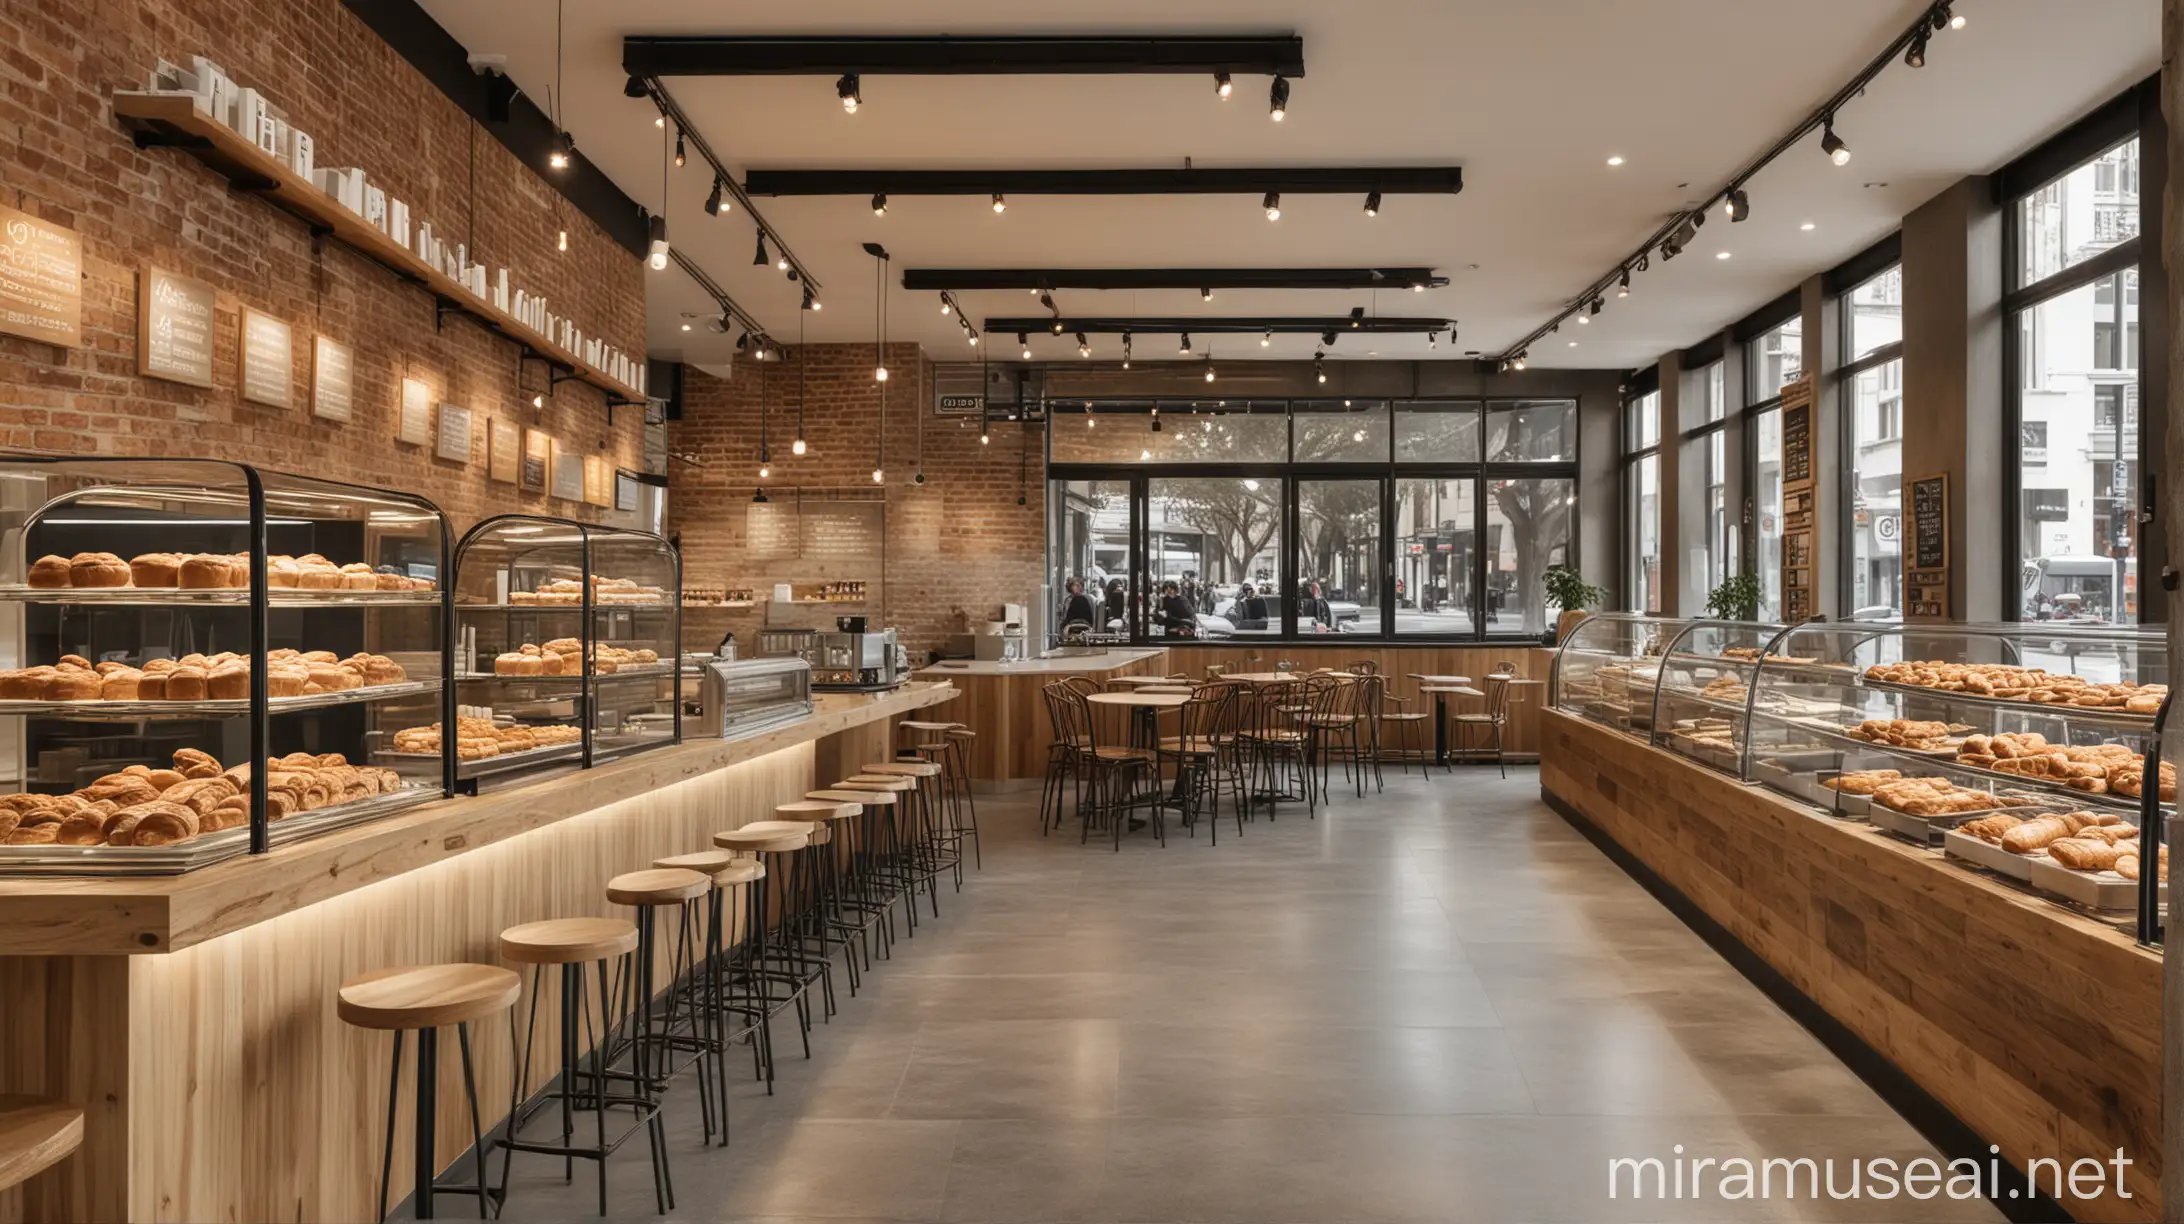 NeoModern Cafe Bakery Interior Architecture A Stylish Blend of Tradition and Innovation